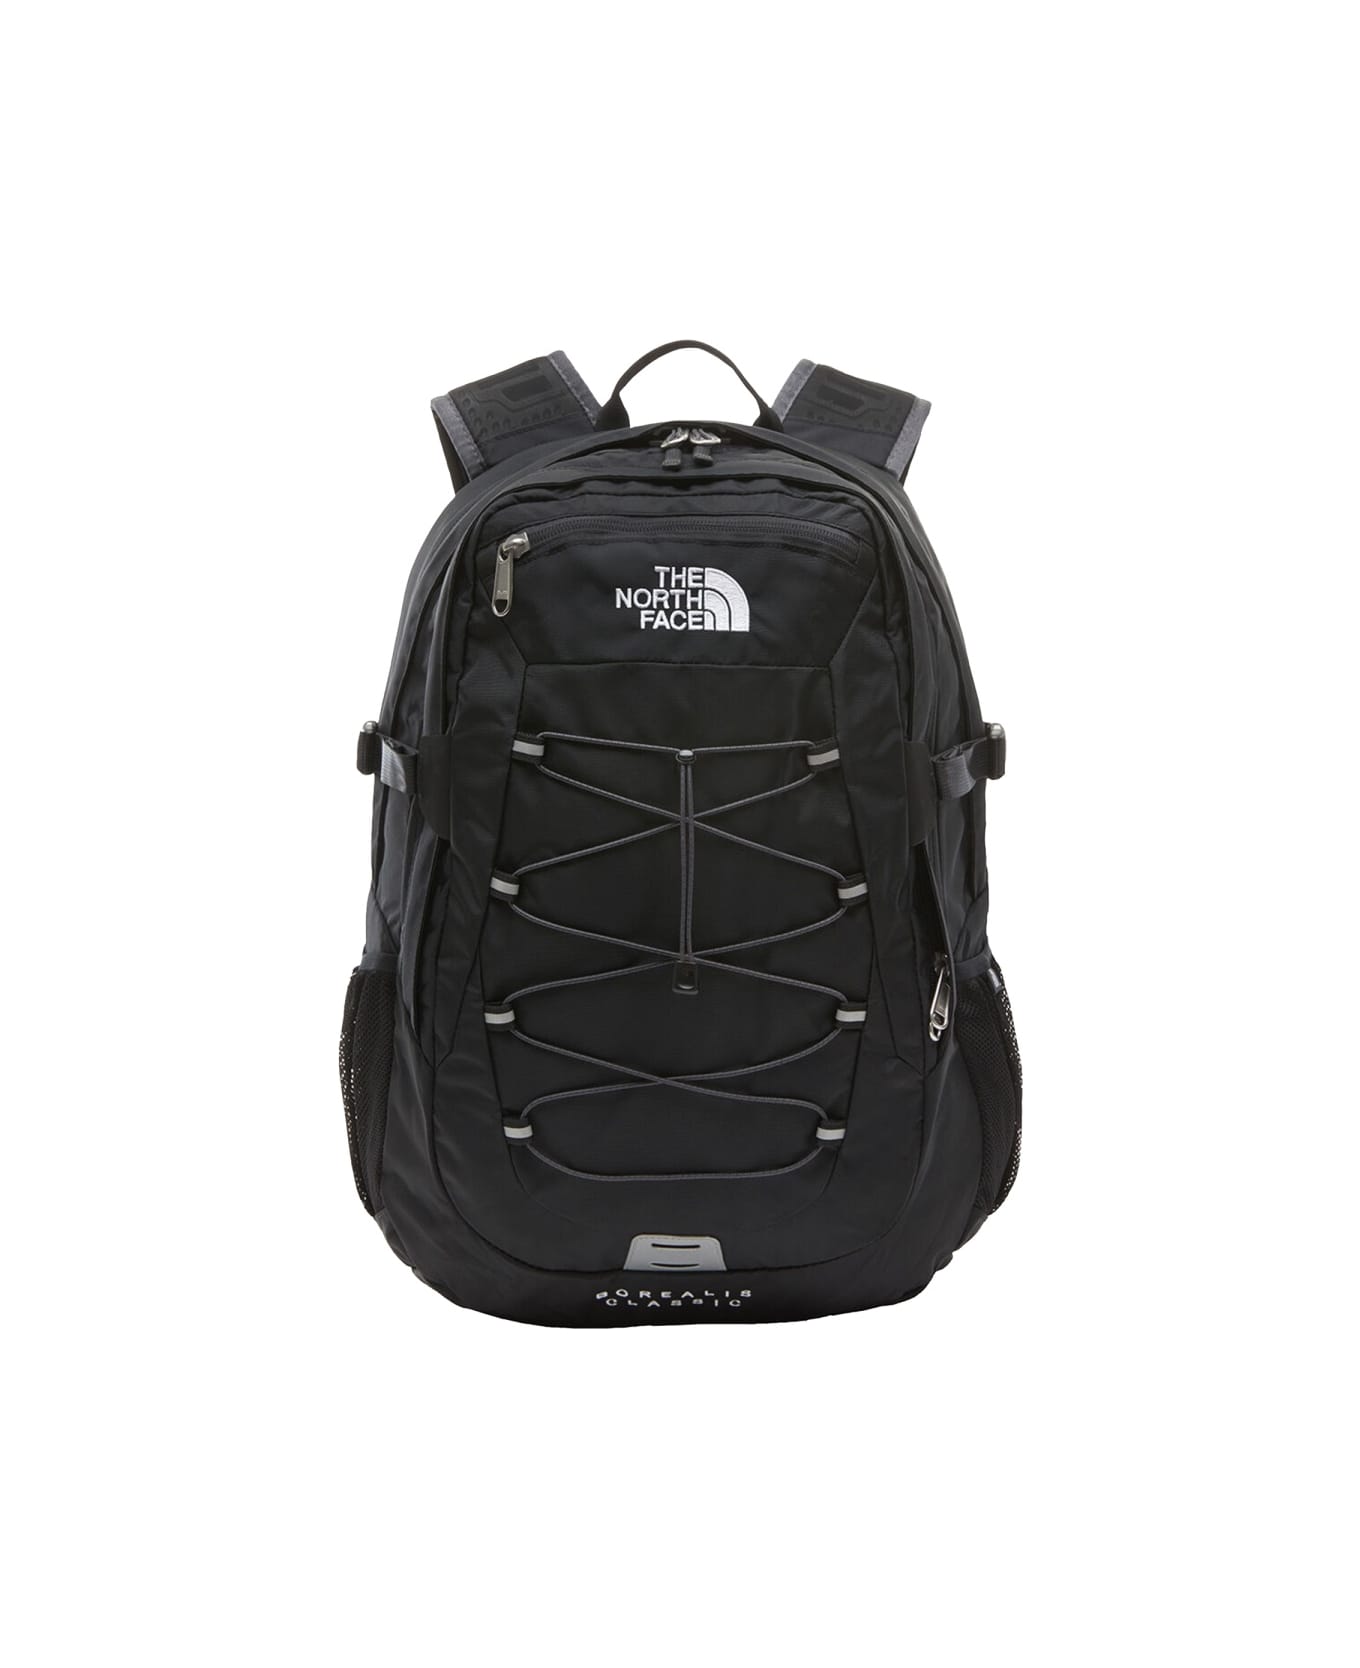 The North Face Borealis Classic Backpack - BLACK